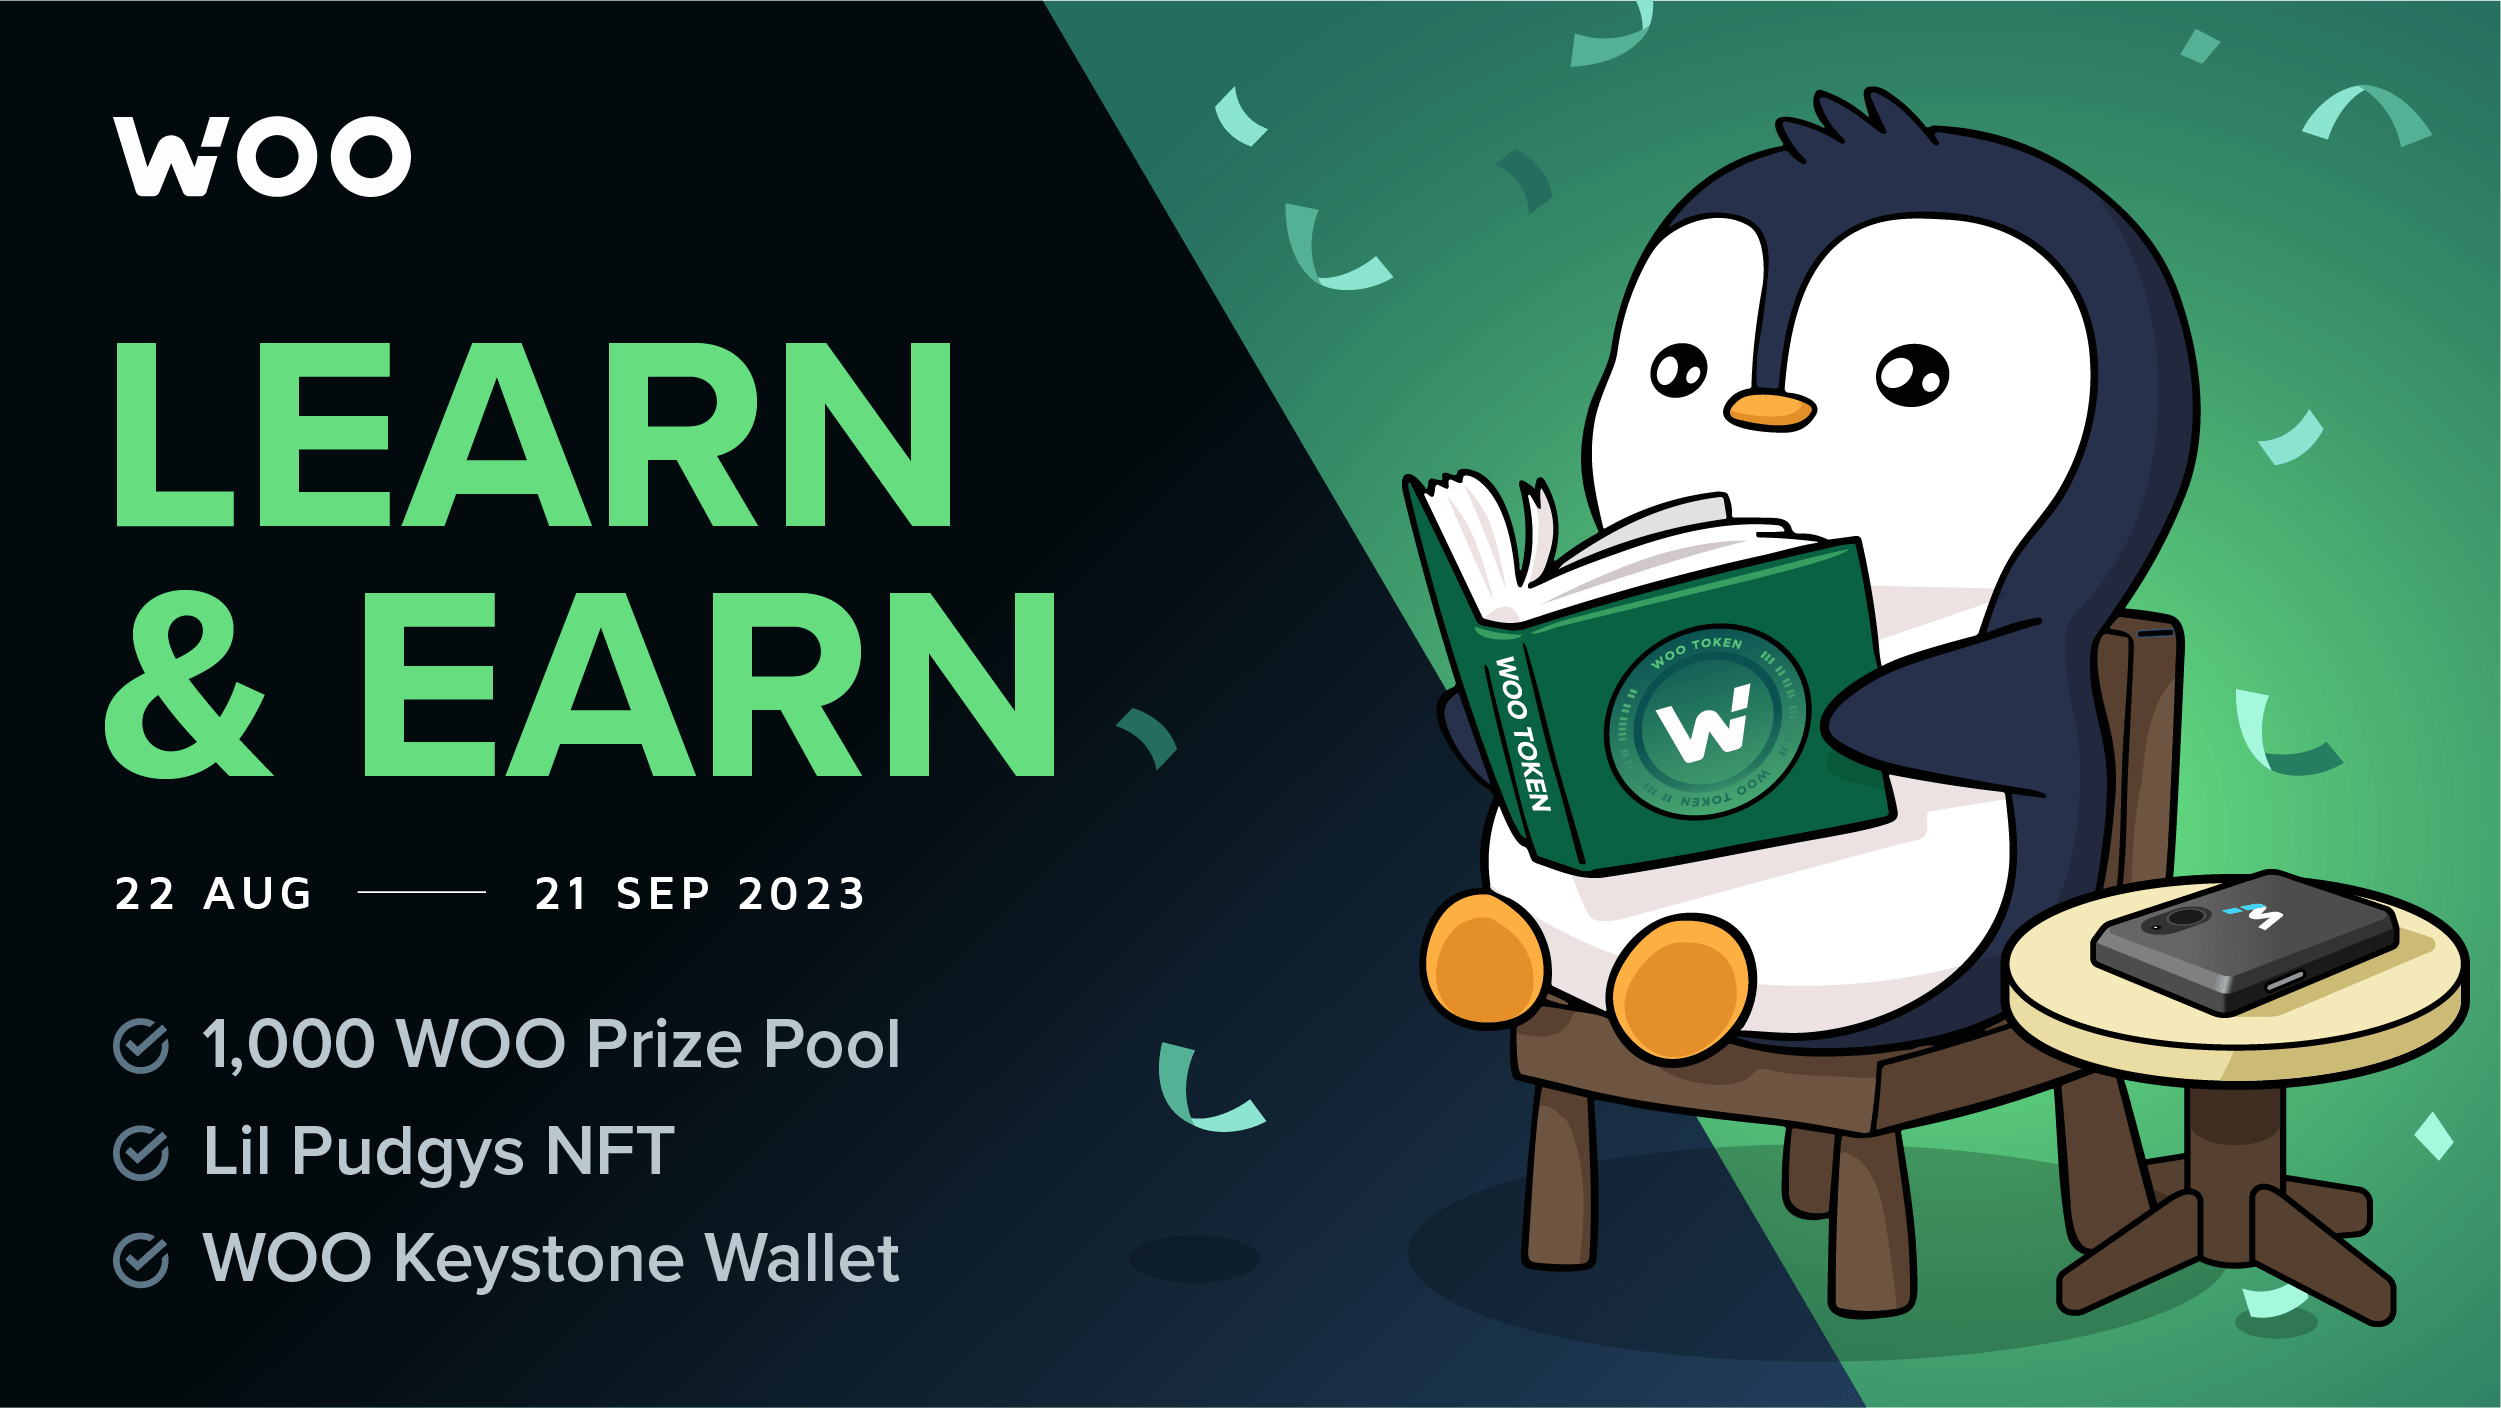 Learn what WOO is all about and win awesome prizes!